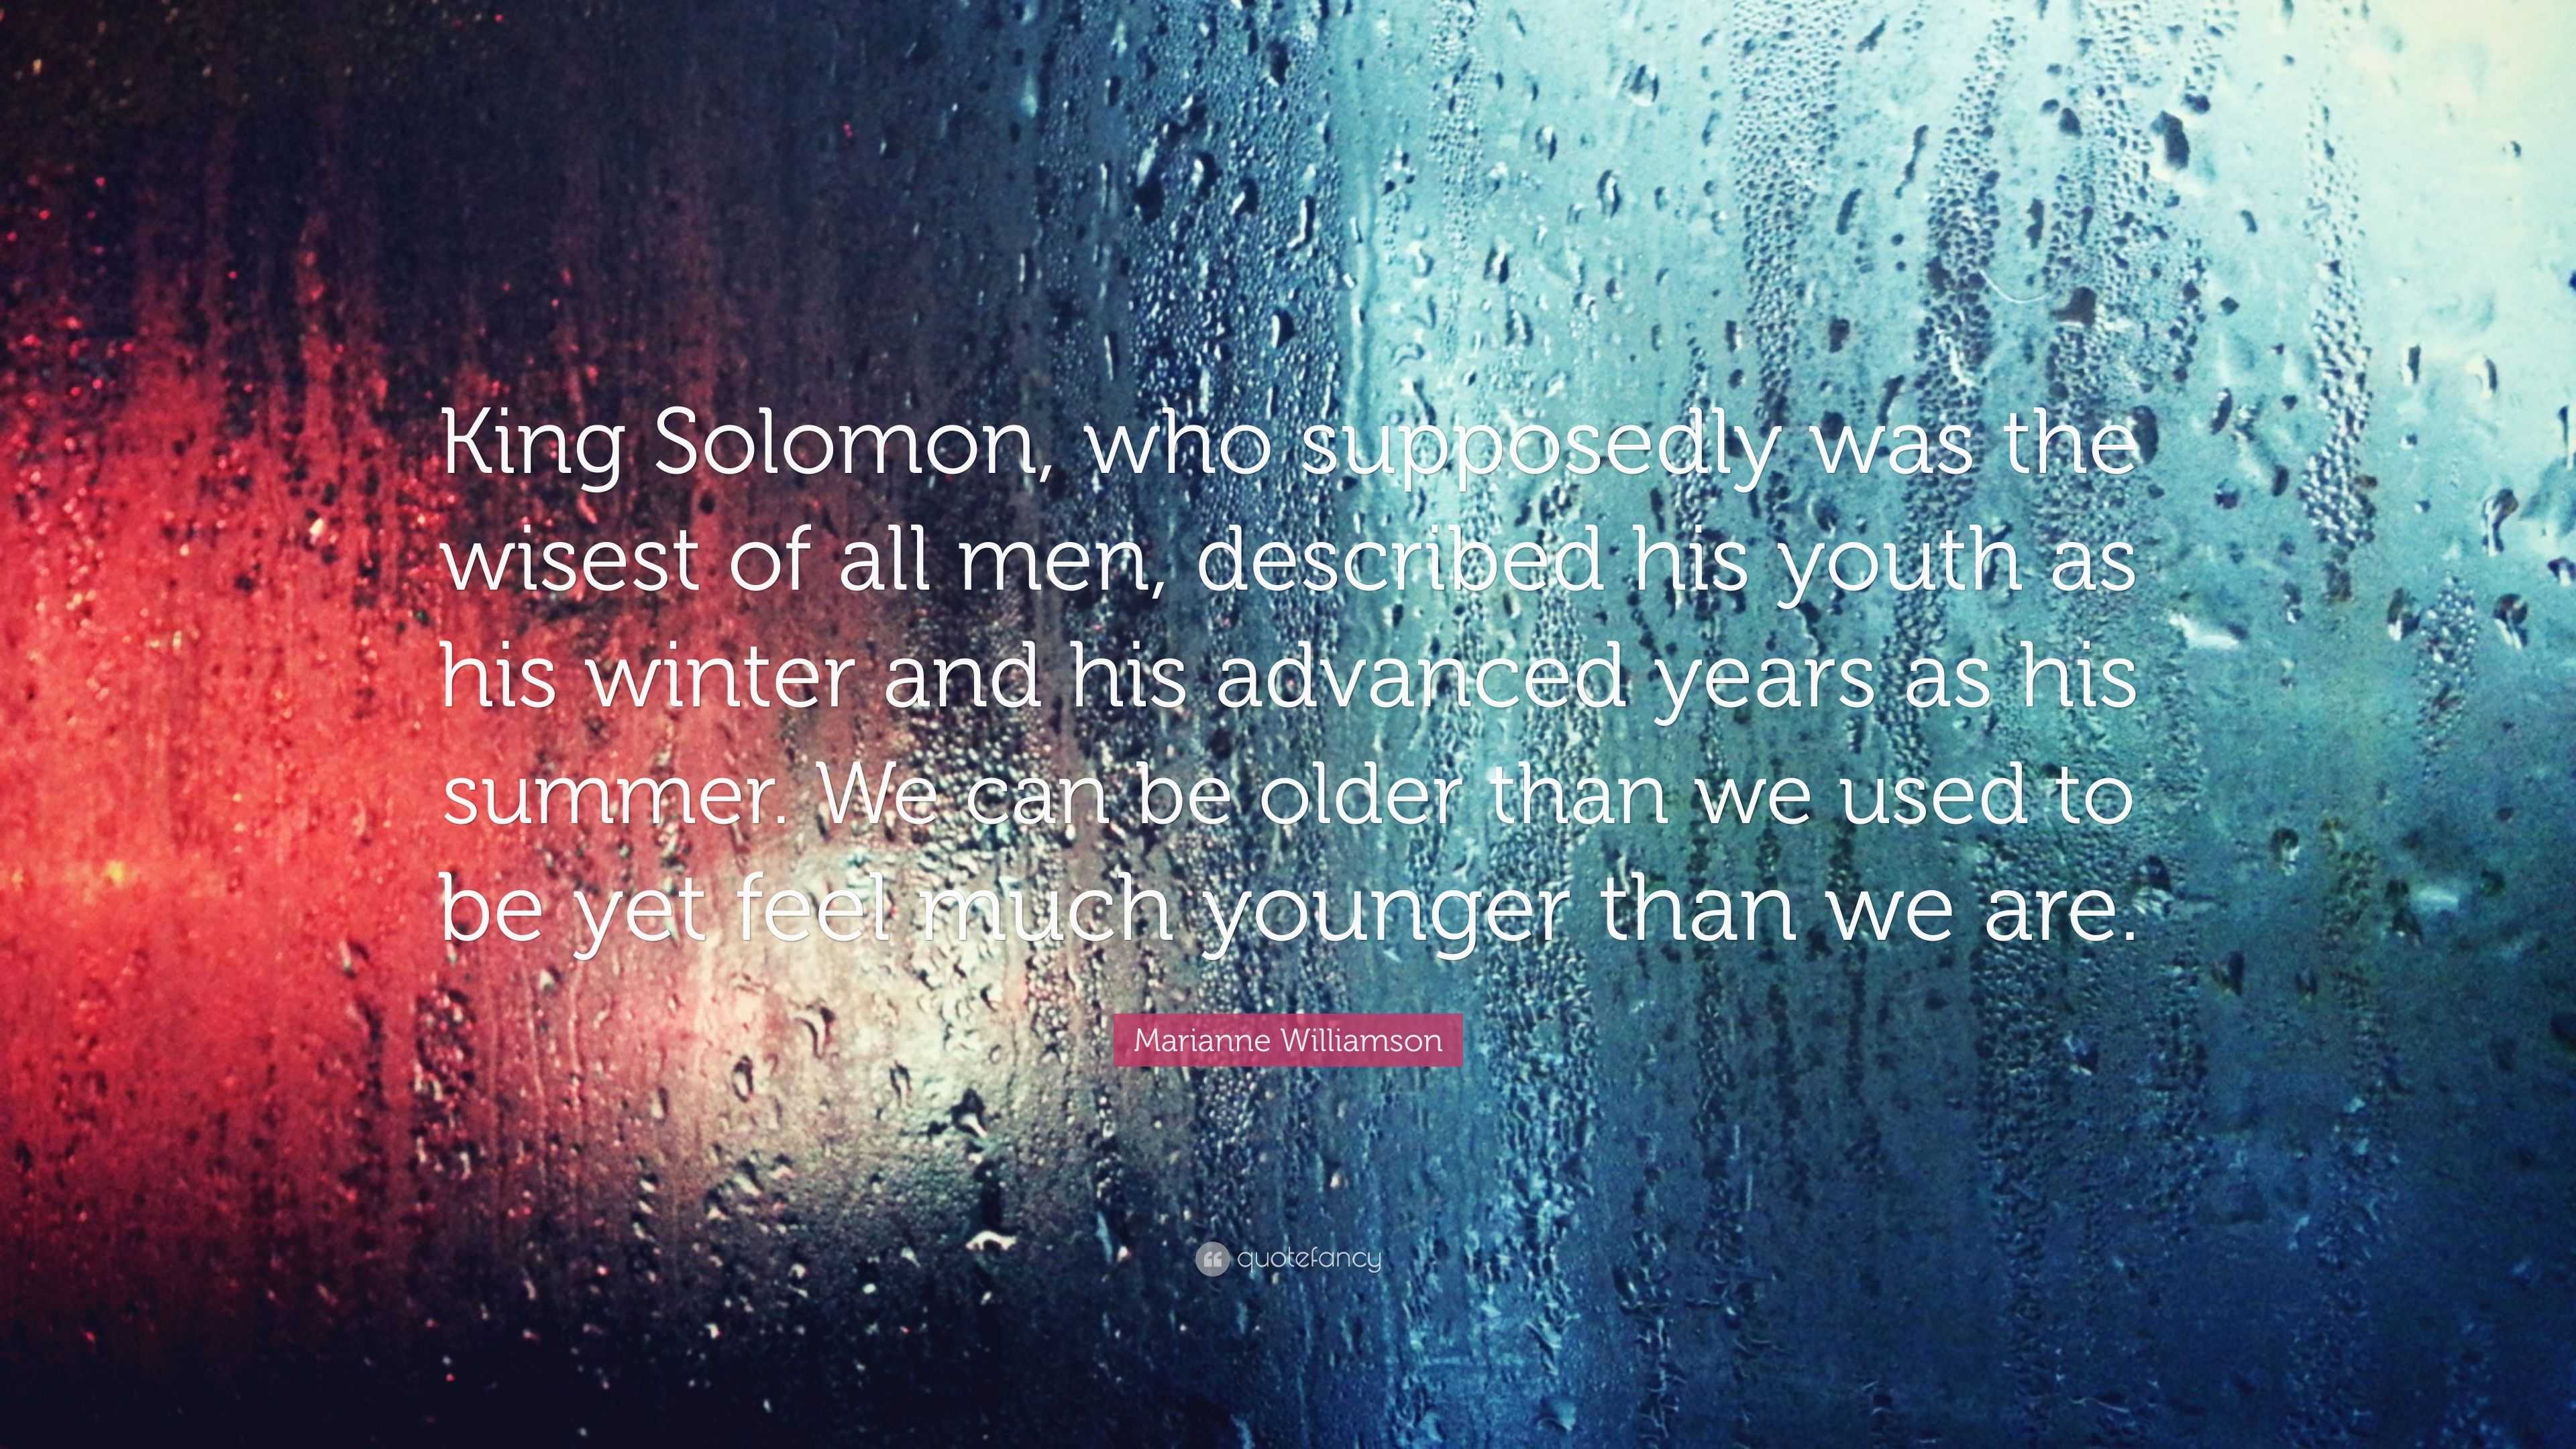 Marianne Williamson Quote: “King Solomon, who supposedly was the wisest